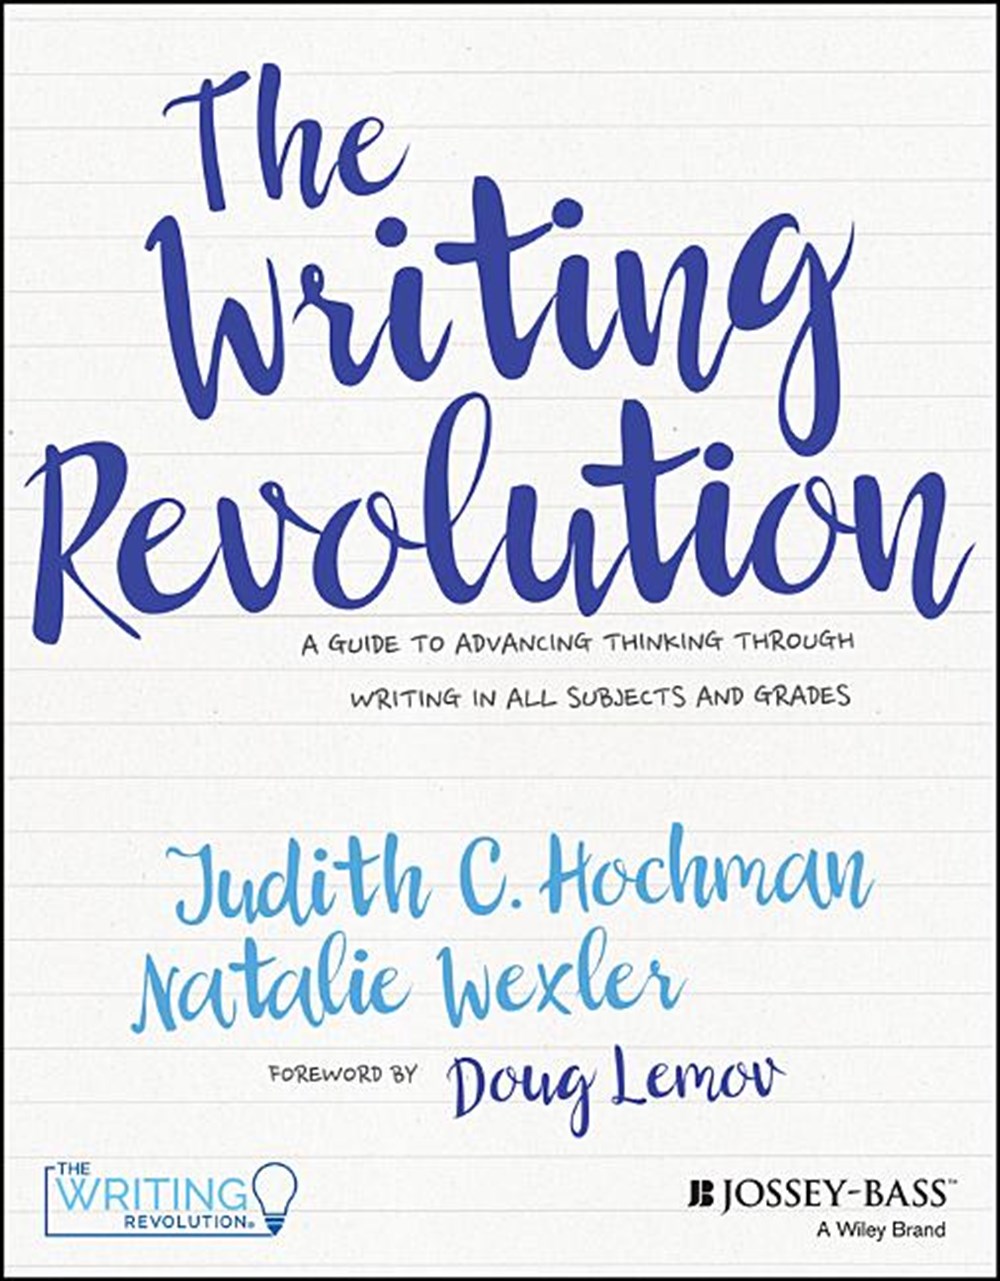 Writing Revolution A Guide to Advancing Thinking Through Writing in All Subjects and Grades